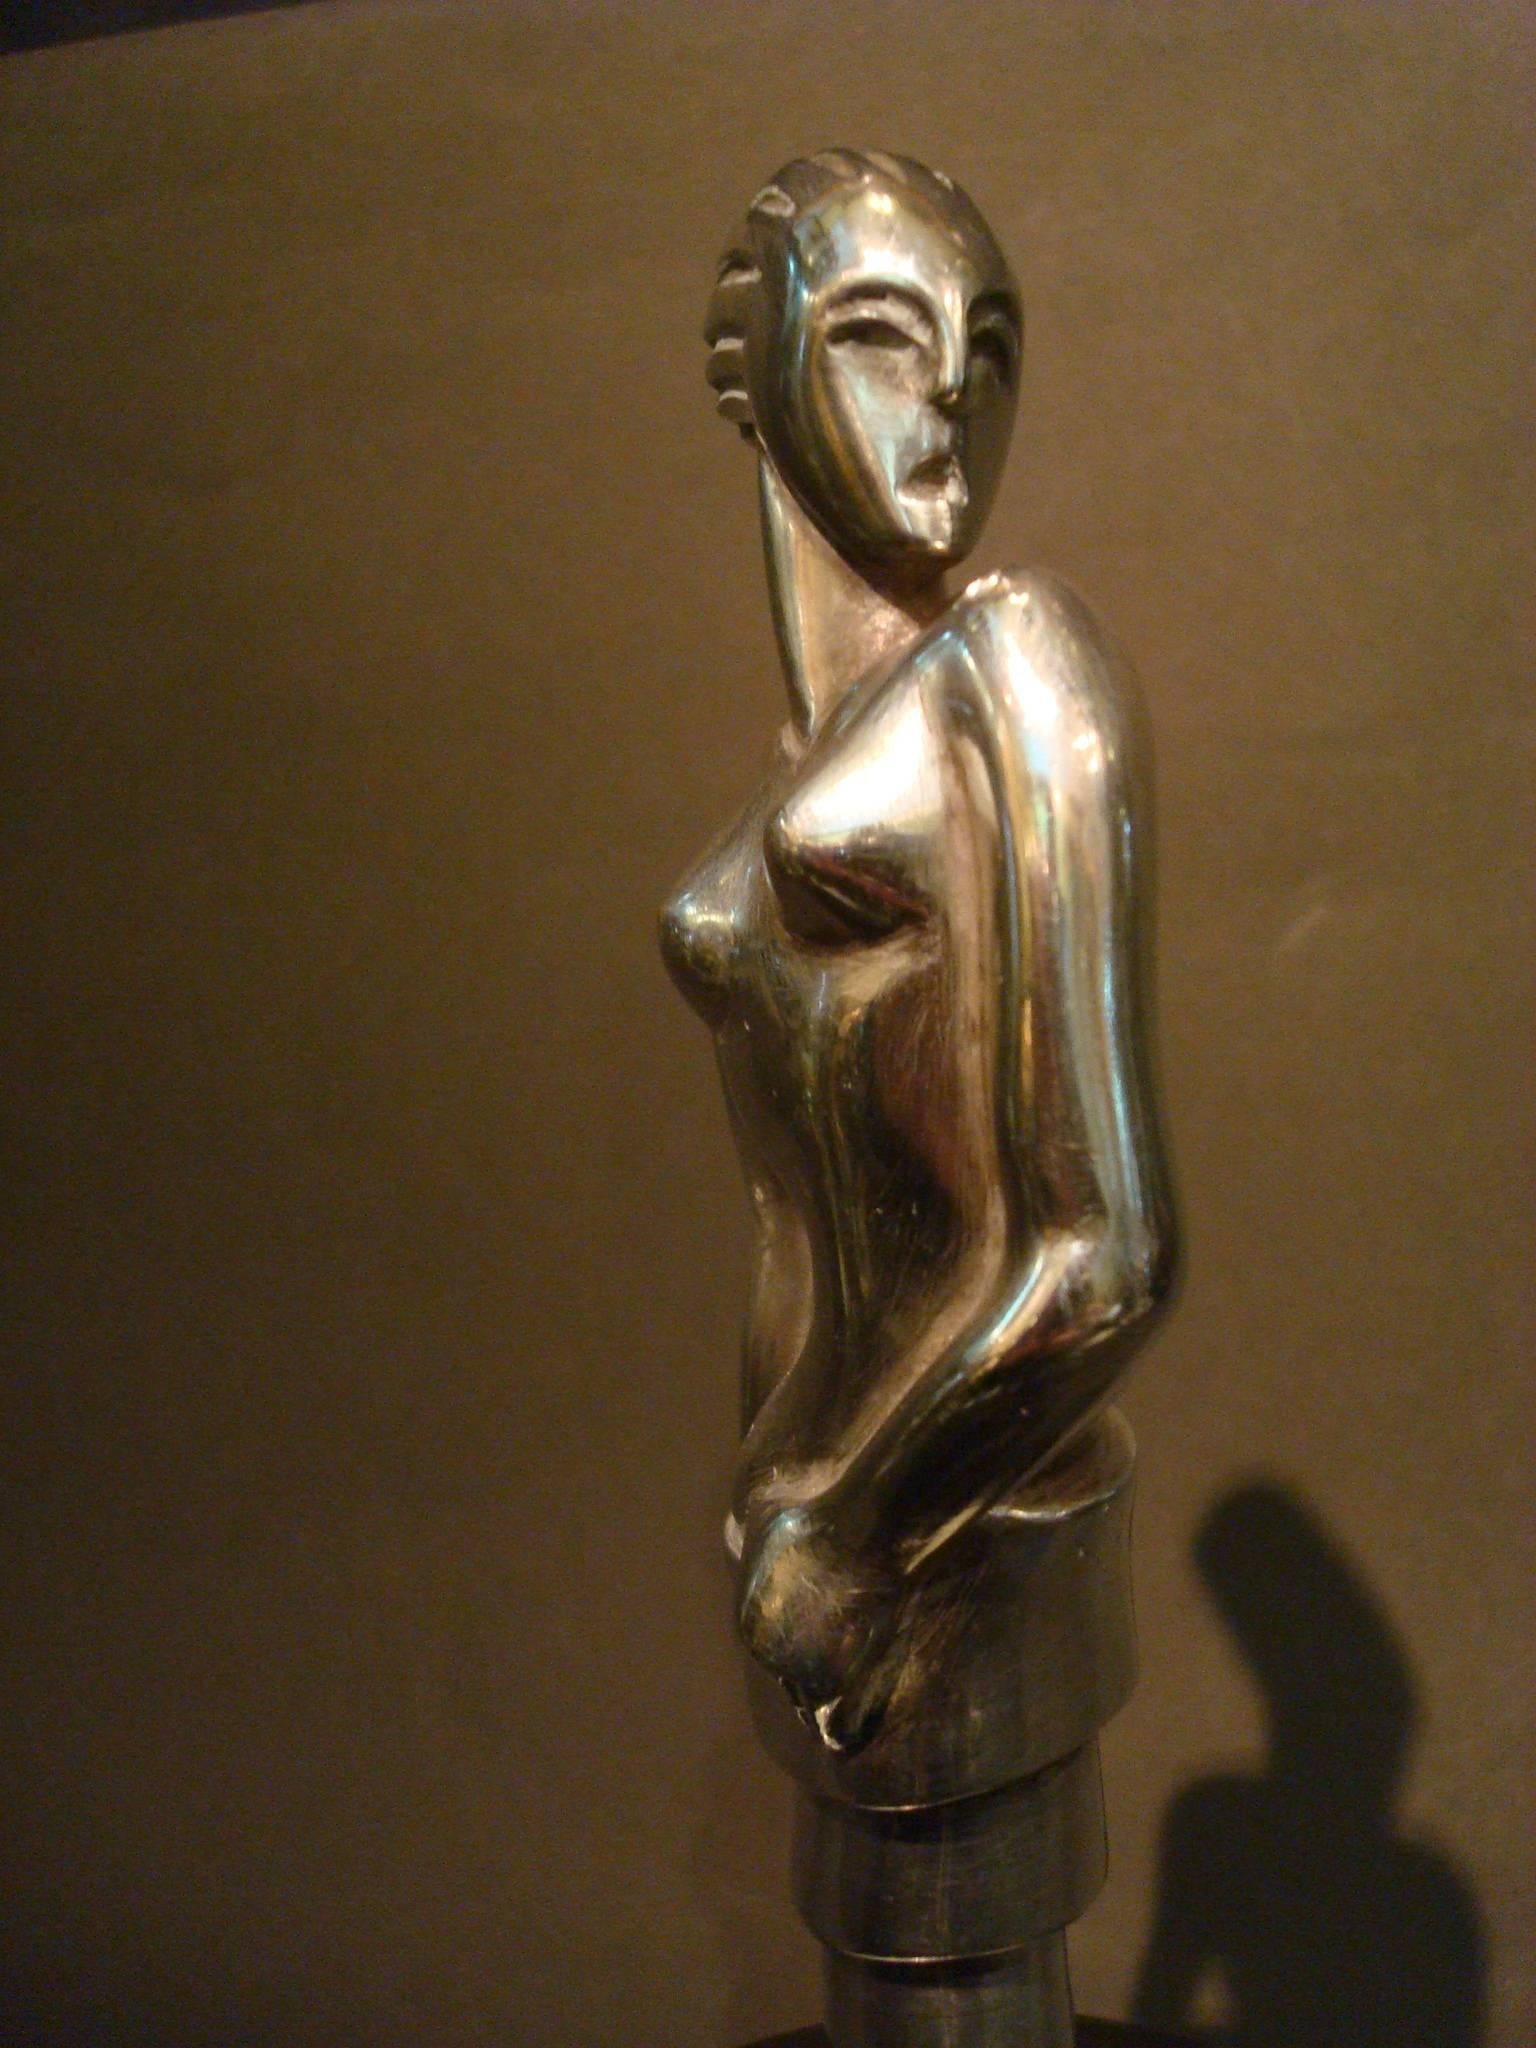 Early 20th Century Rare Standing Woman Art Deco Car Mascot by S. Rueff, French, 1925